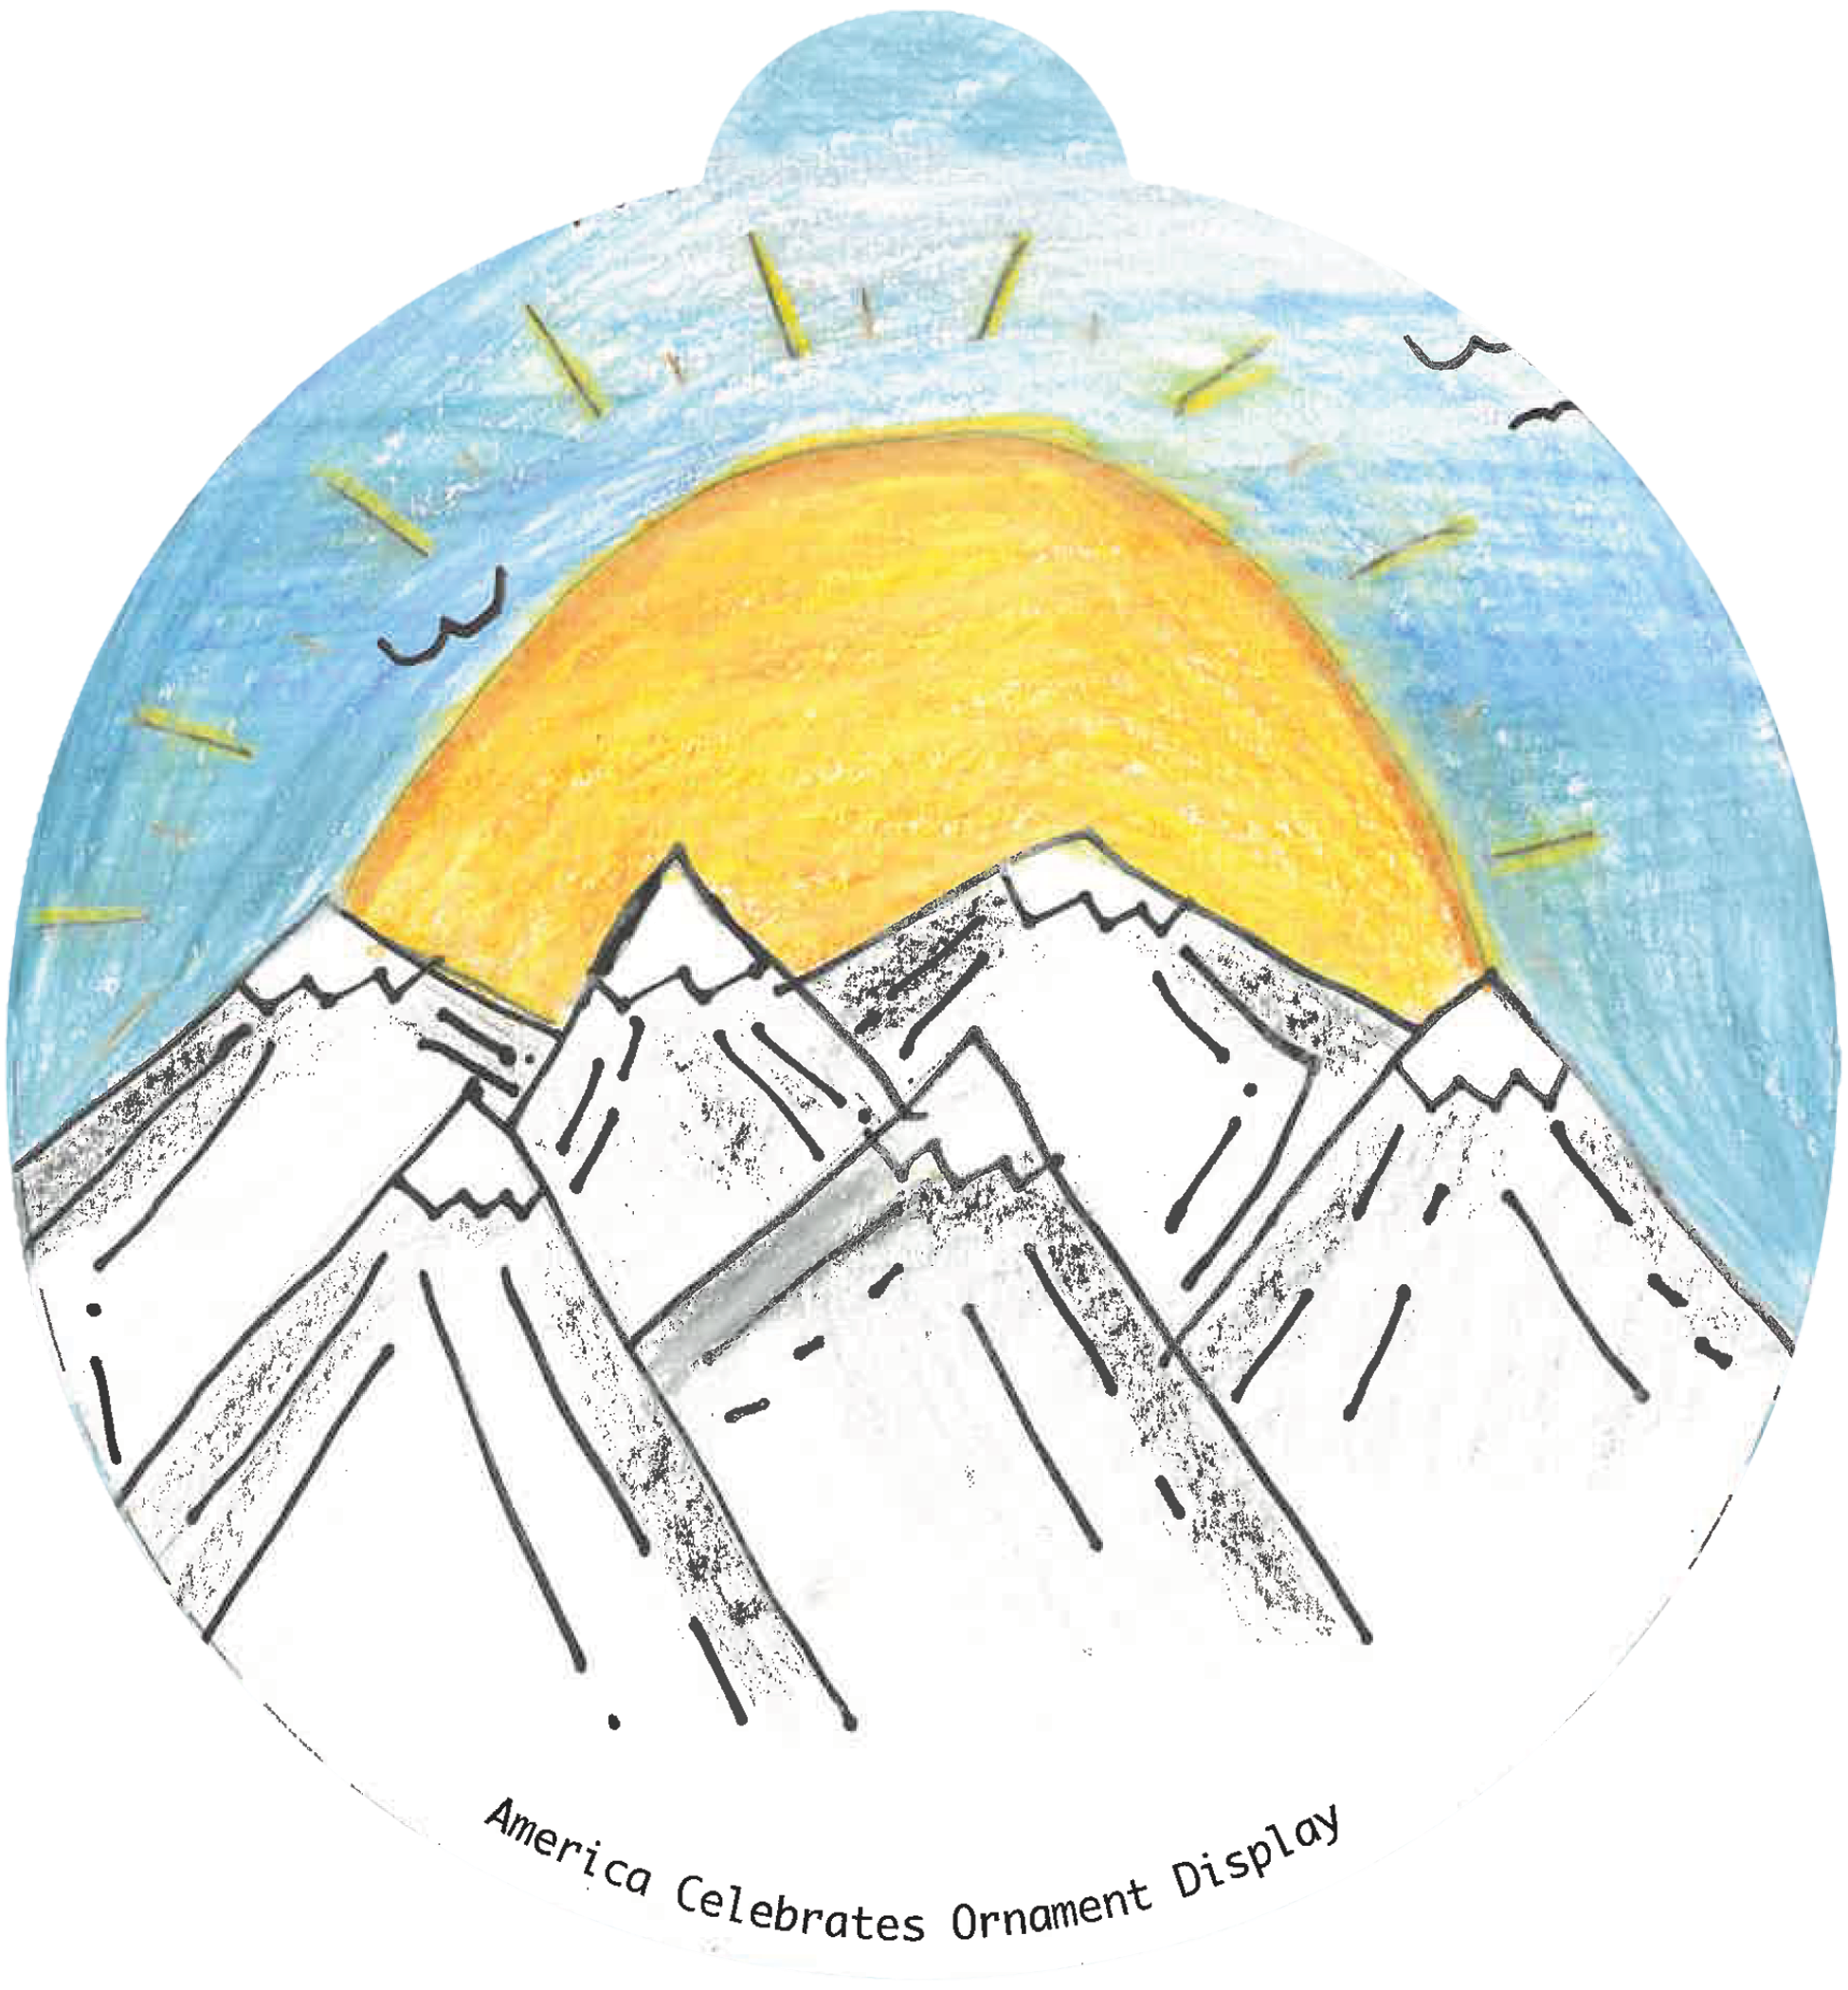 ornament depicting a sun rising over snow-capped mountains